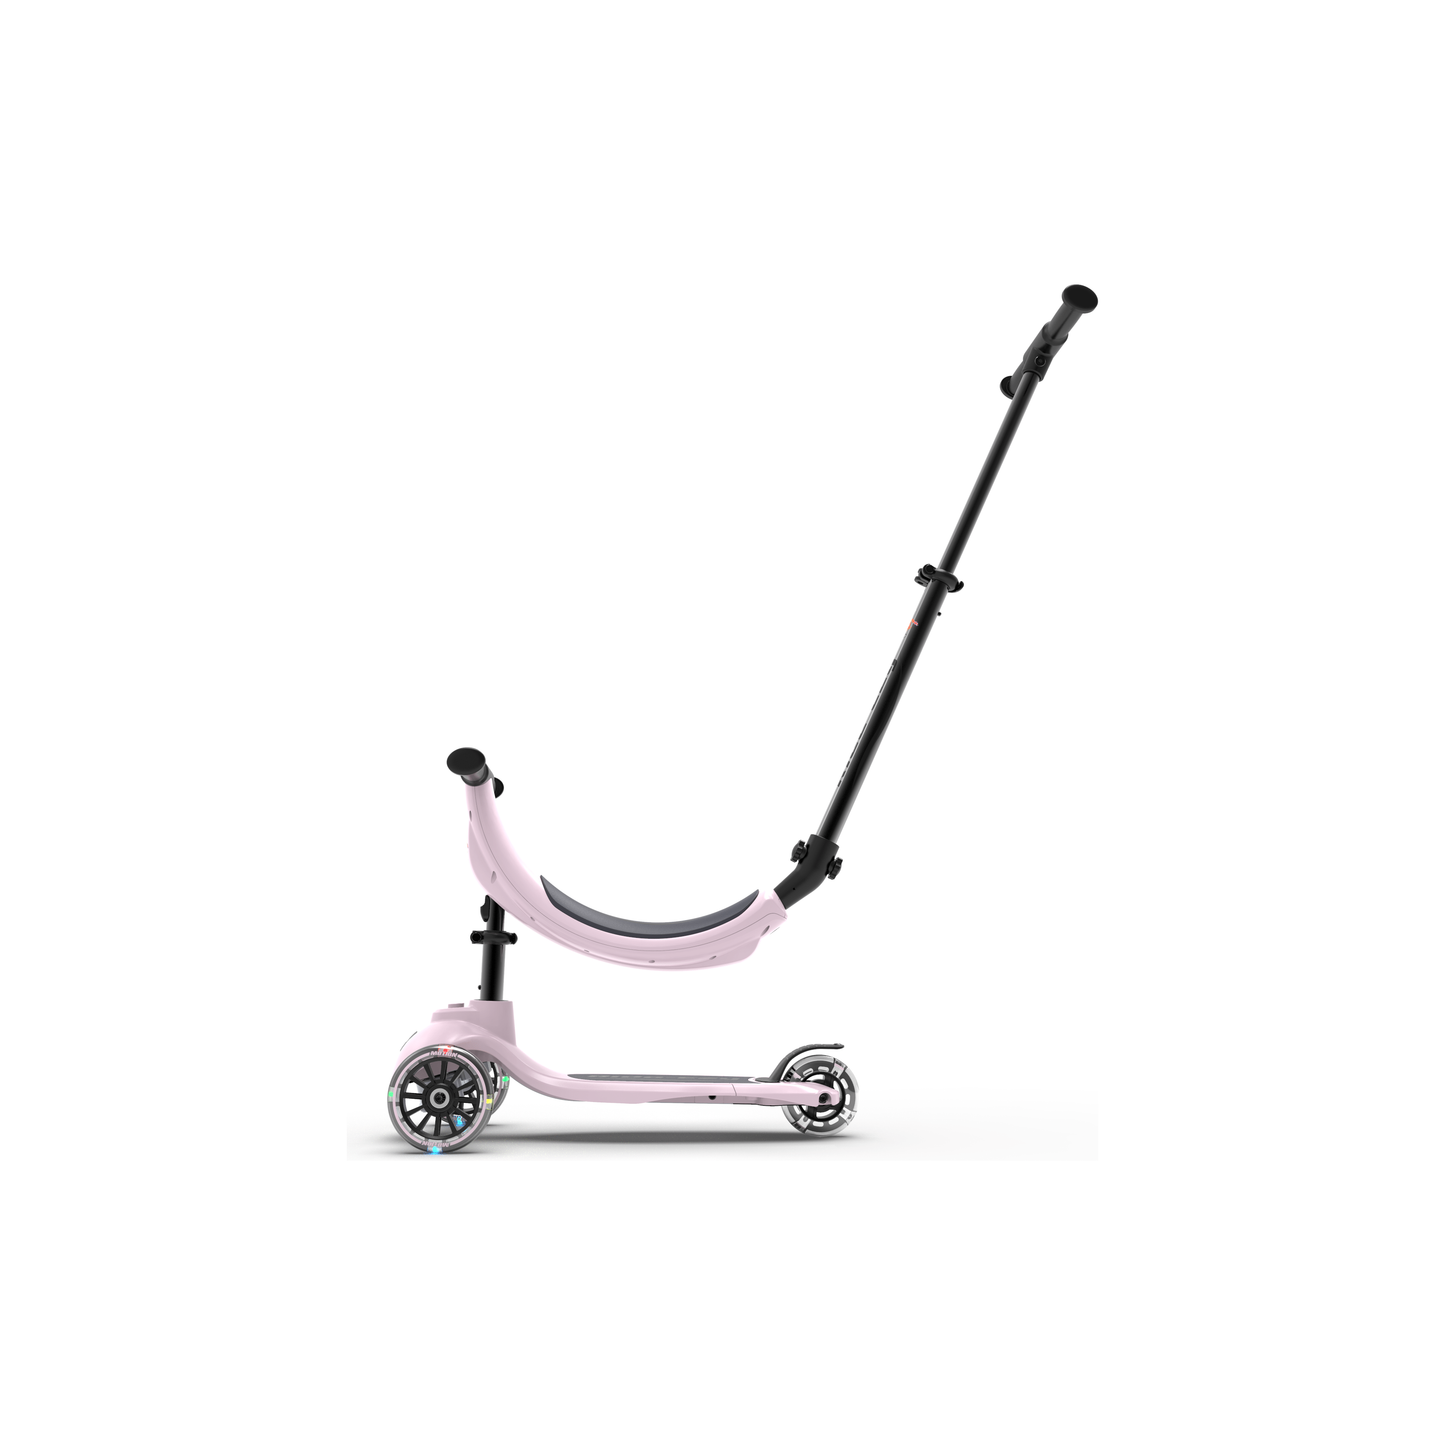 Ride-Ezy Kick & Go Scooter - Blossom stage 1 side